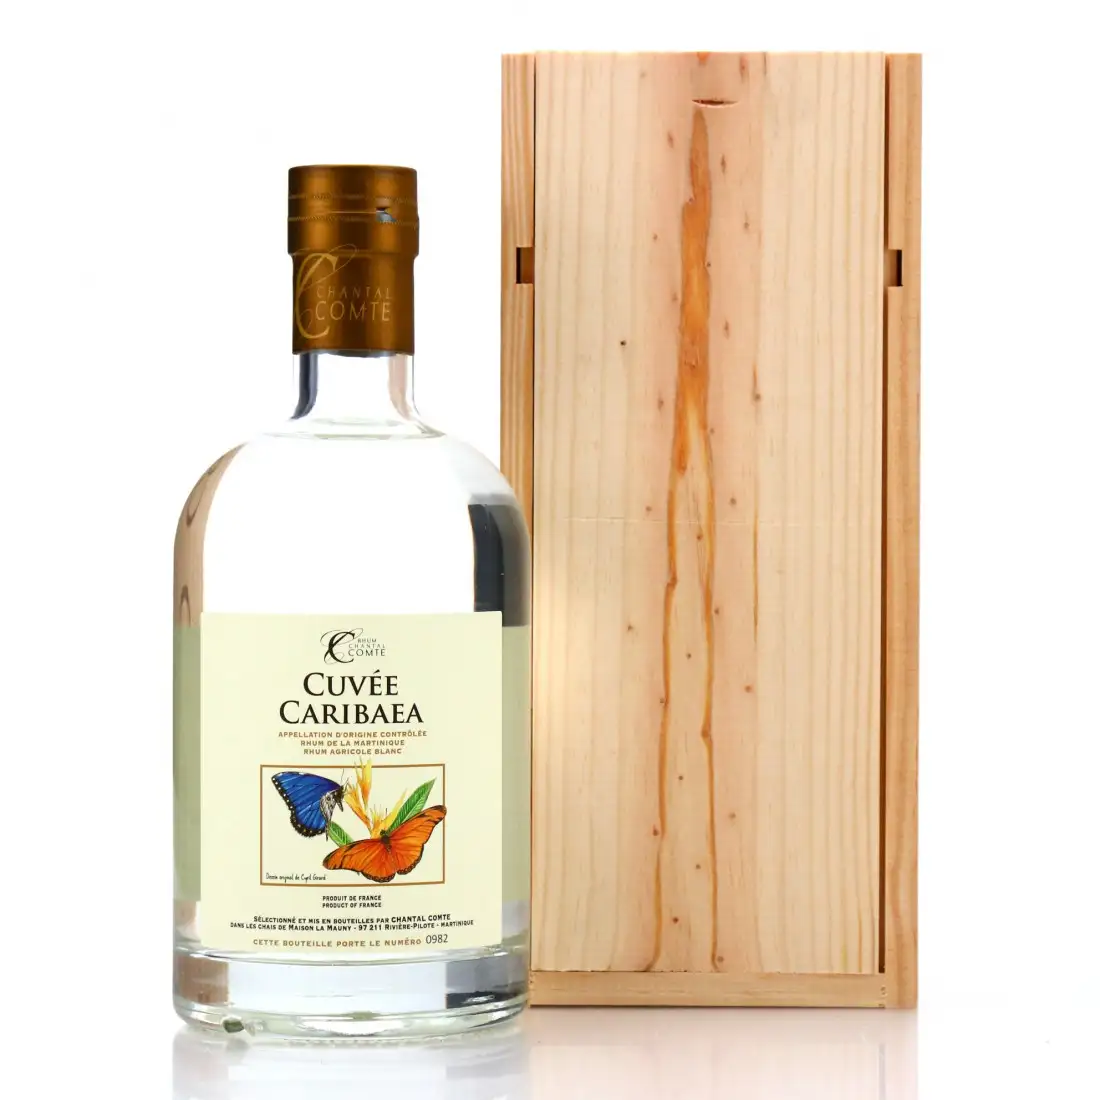 Image of the front of the bottle of the rum Cuvée Caribaea